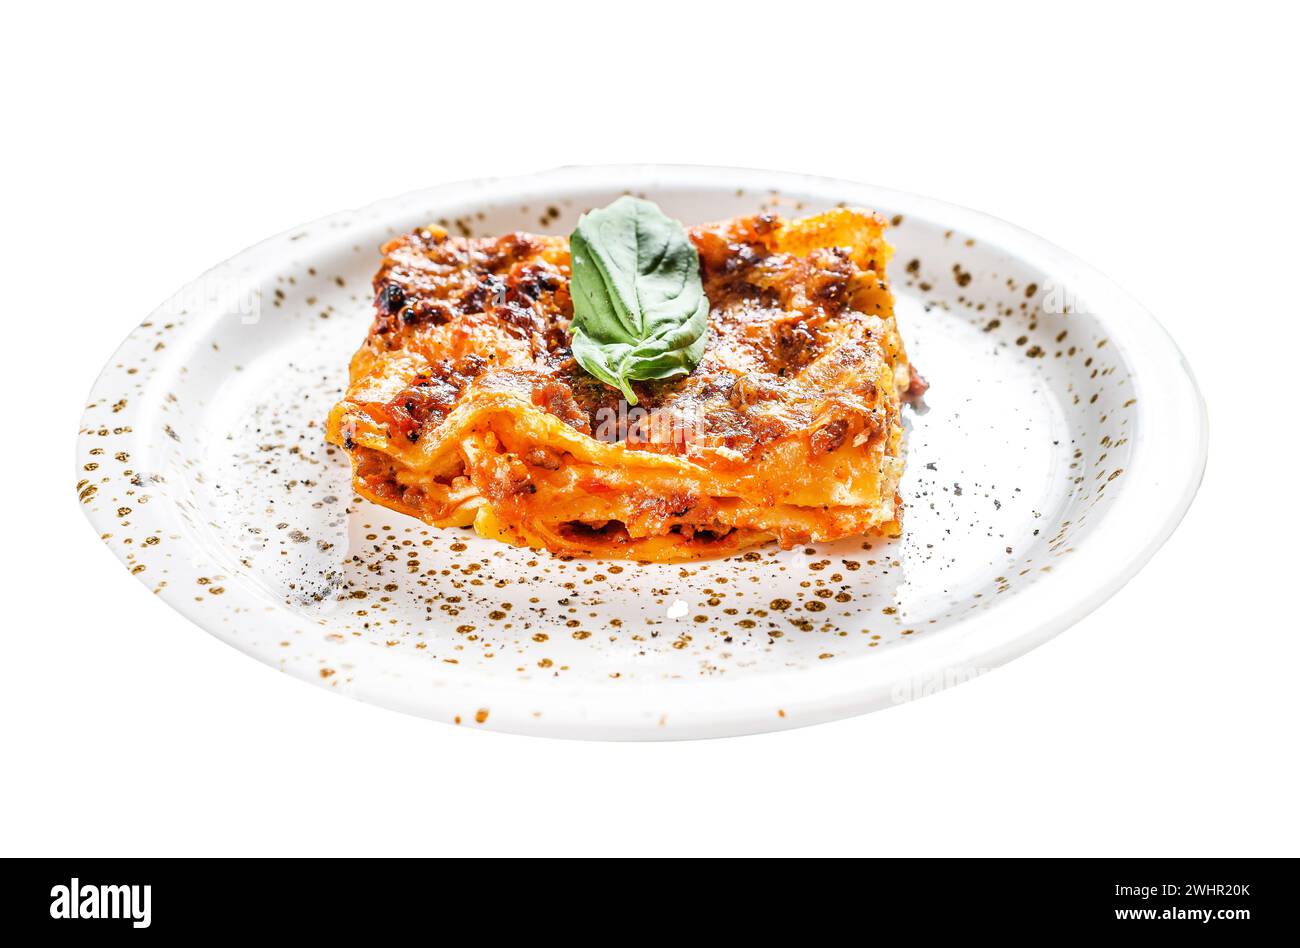 Traditional lasagna made with minced beef, bolognese and bechamel sauces. Isolated on white background. Top view Stock Photo